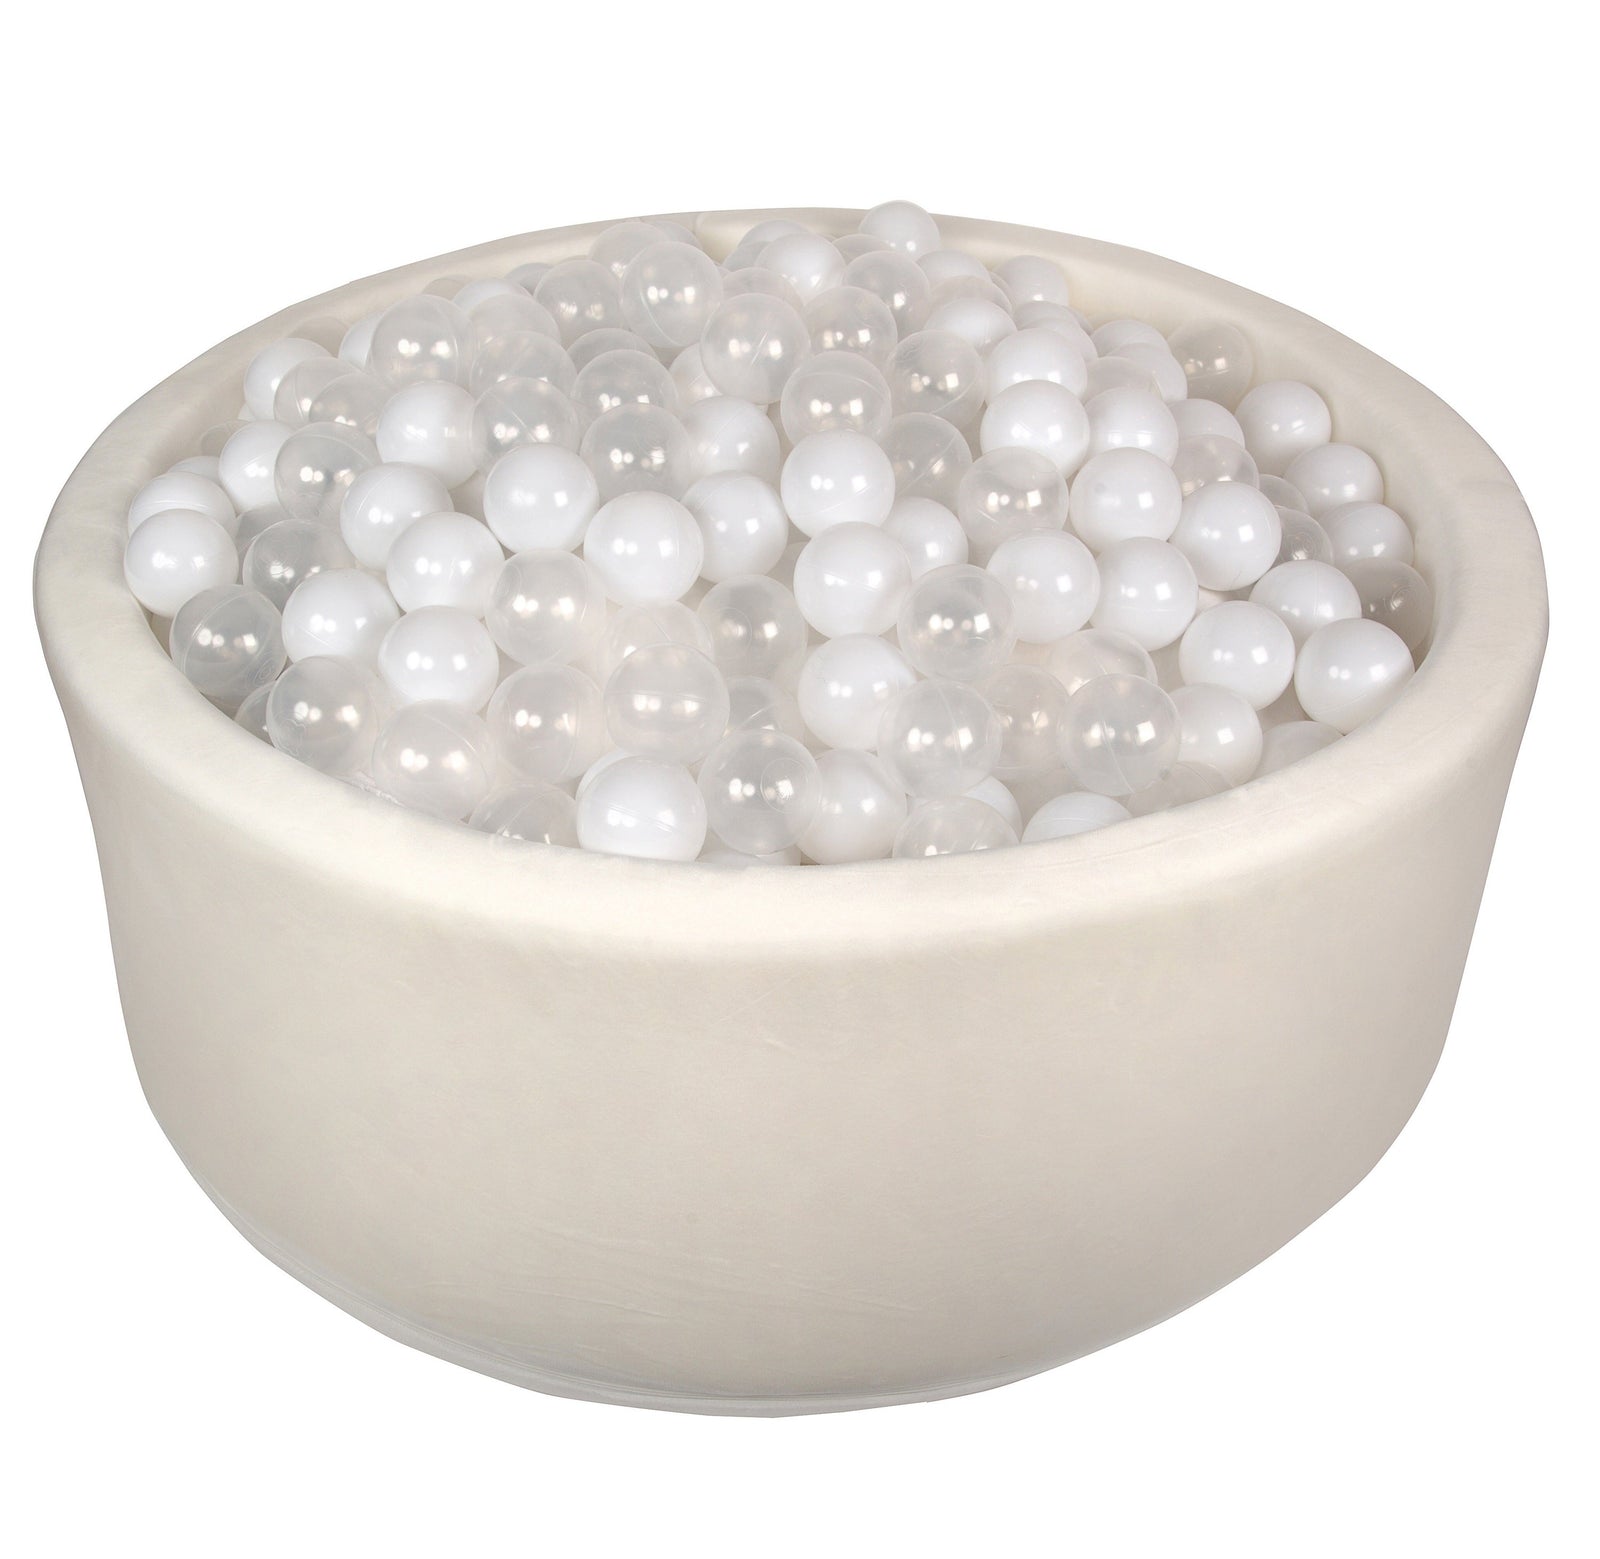 White Ball Pit With Plastic Balls